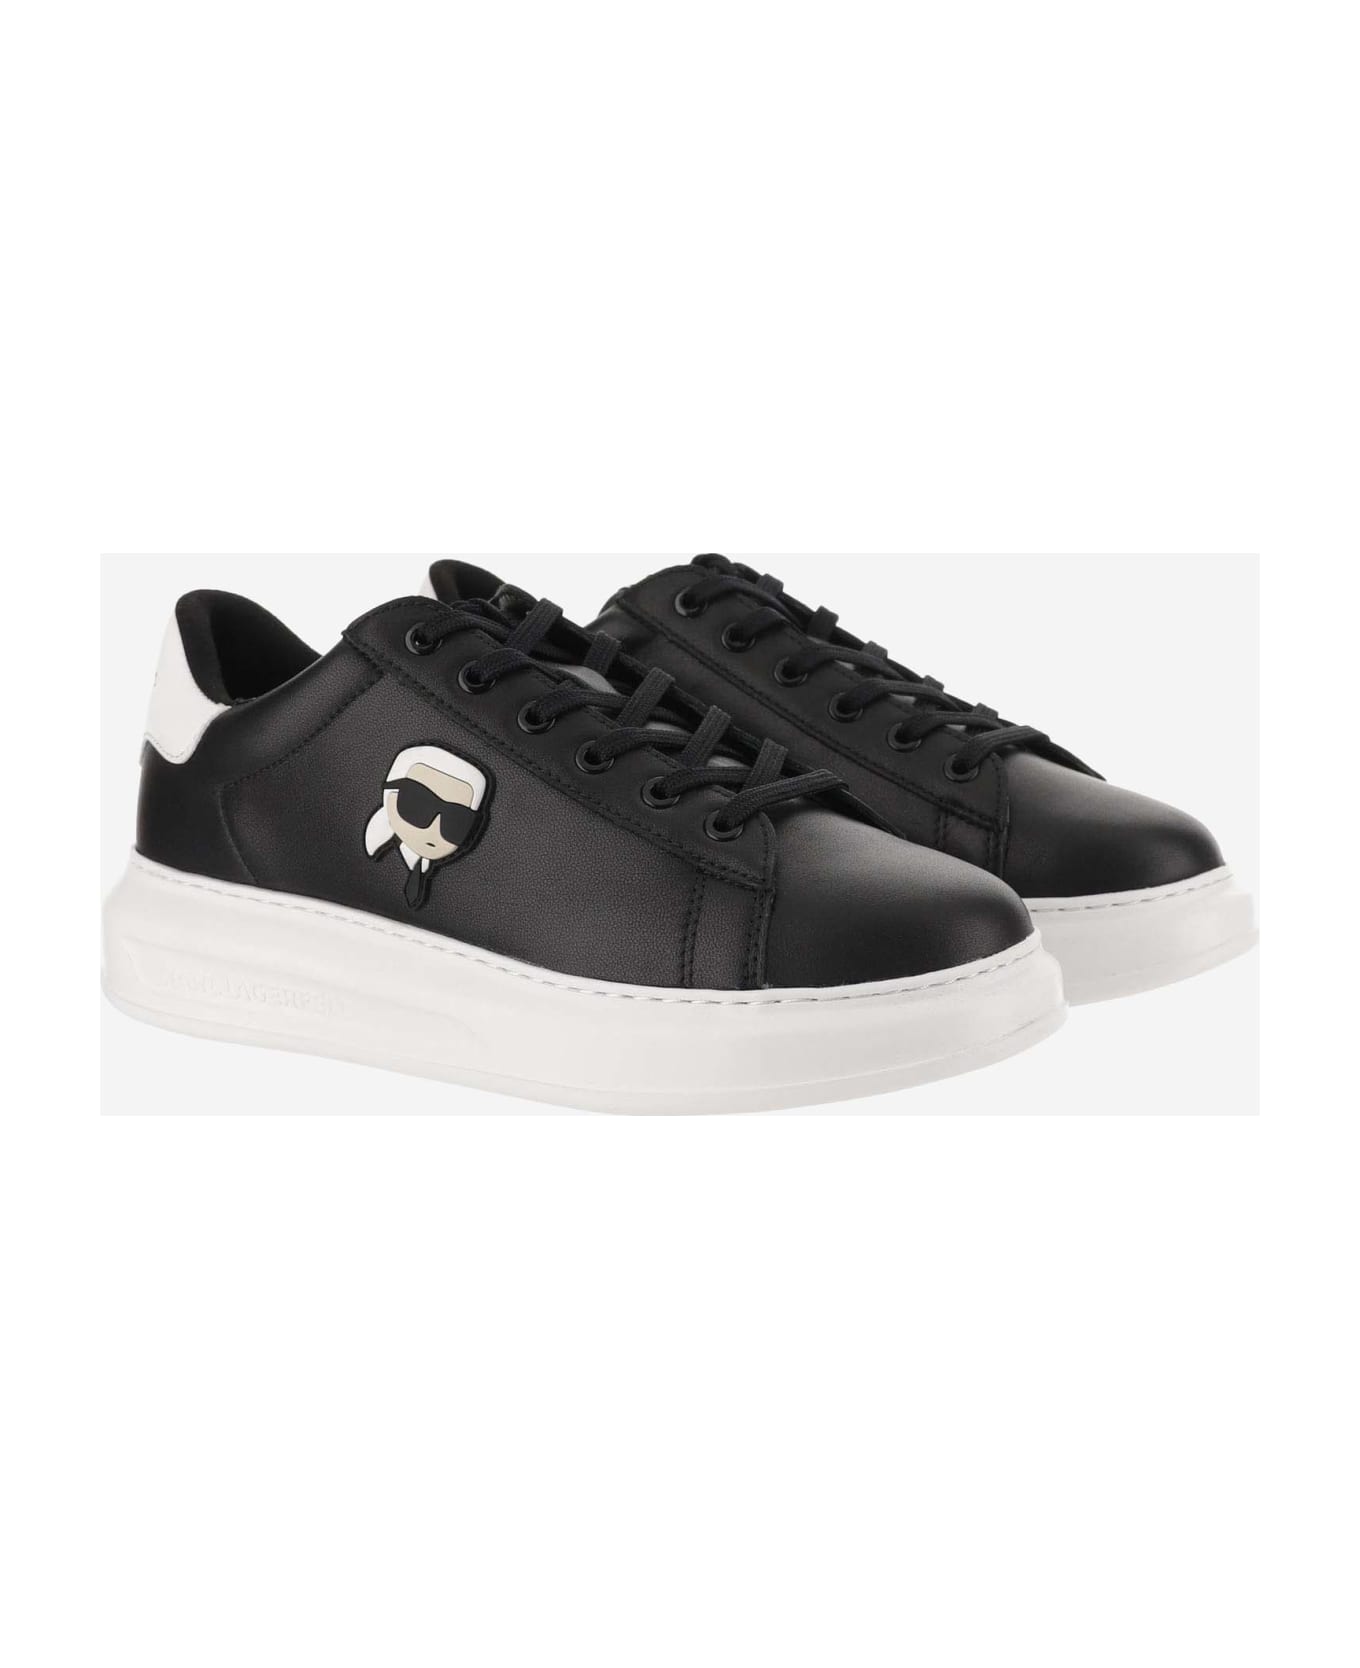 Karl Lagerfeld Leather Sneakers With Logo - Black